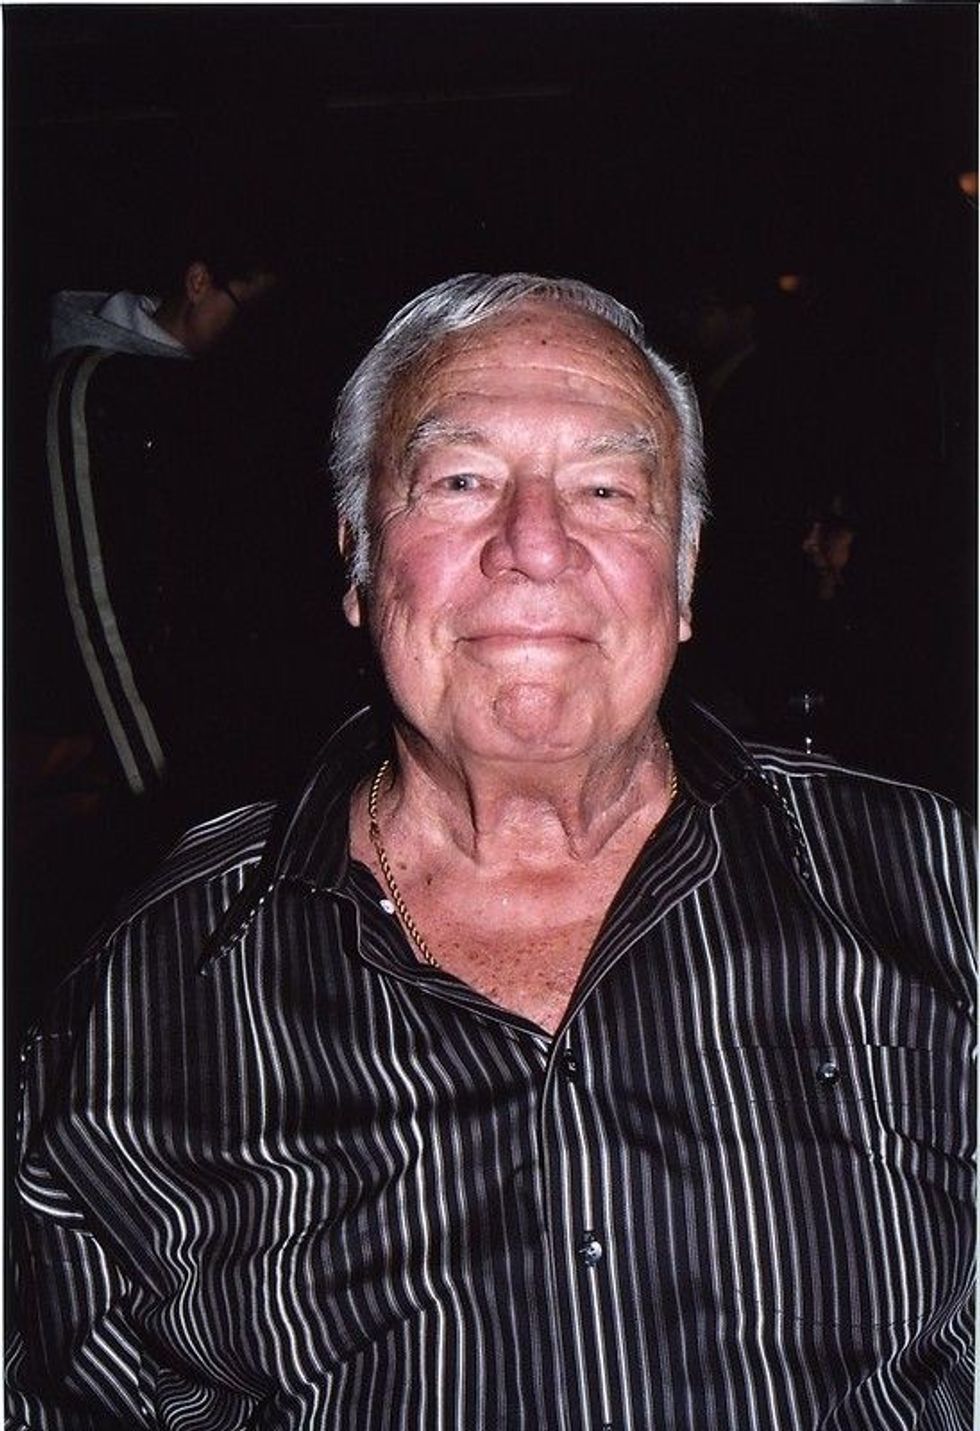 George Kennedy was born in 1925 in New York City.